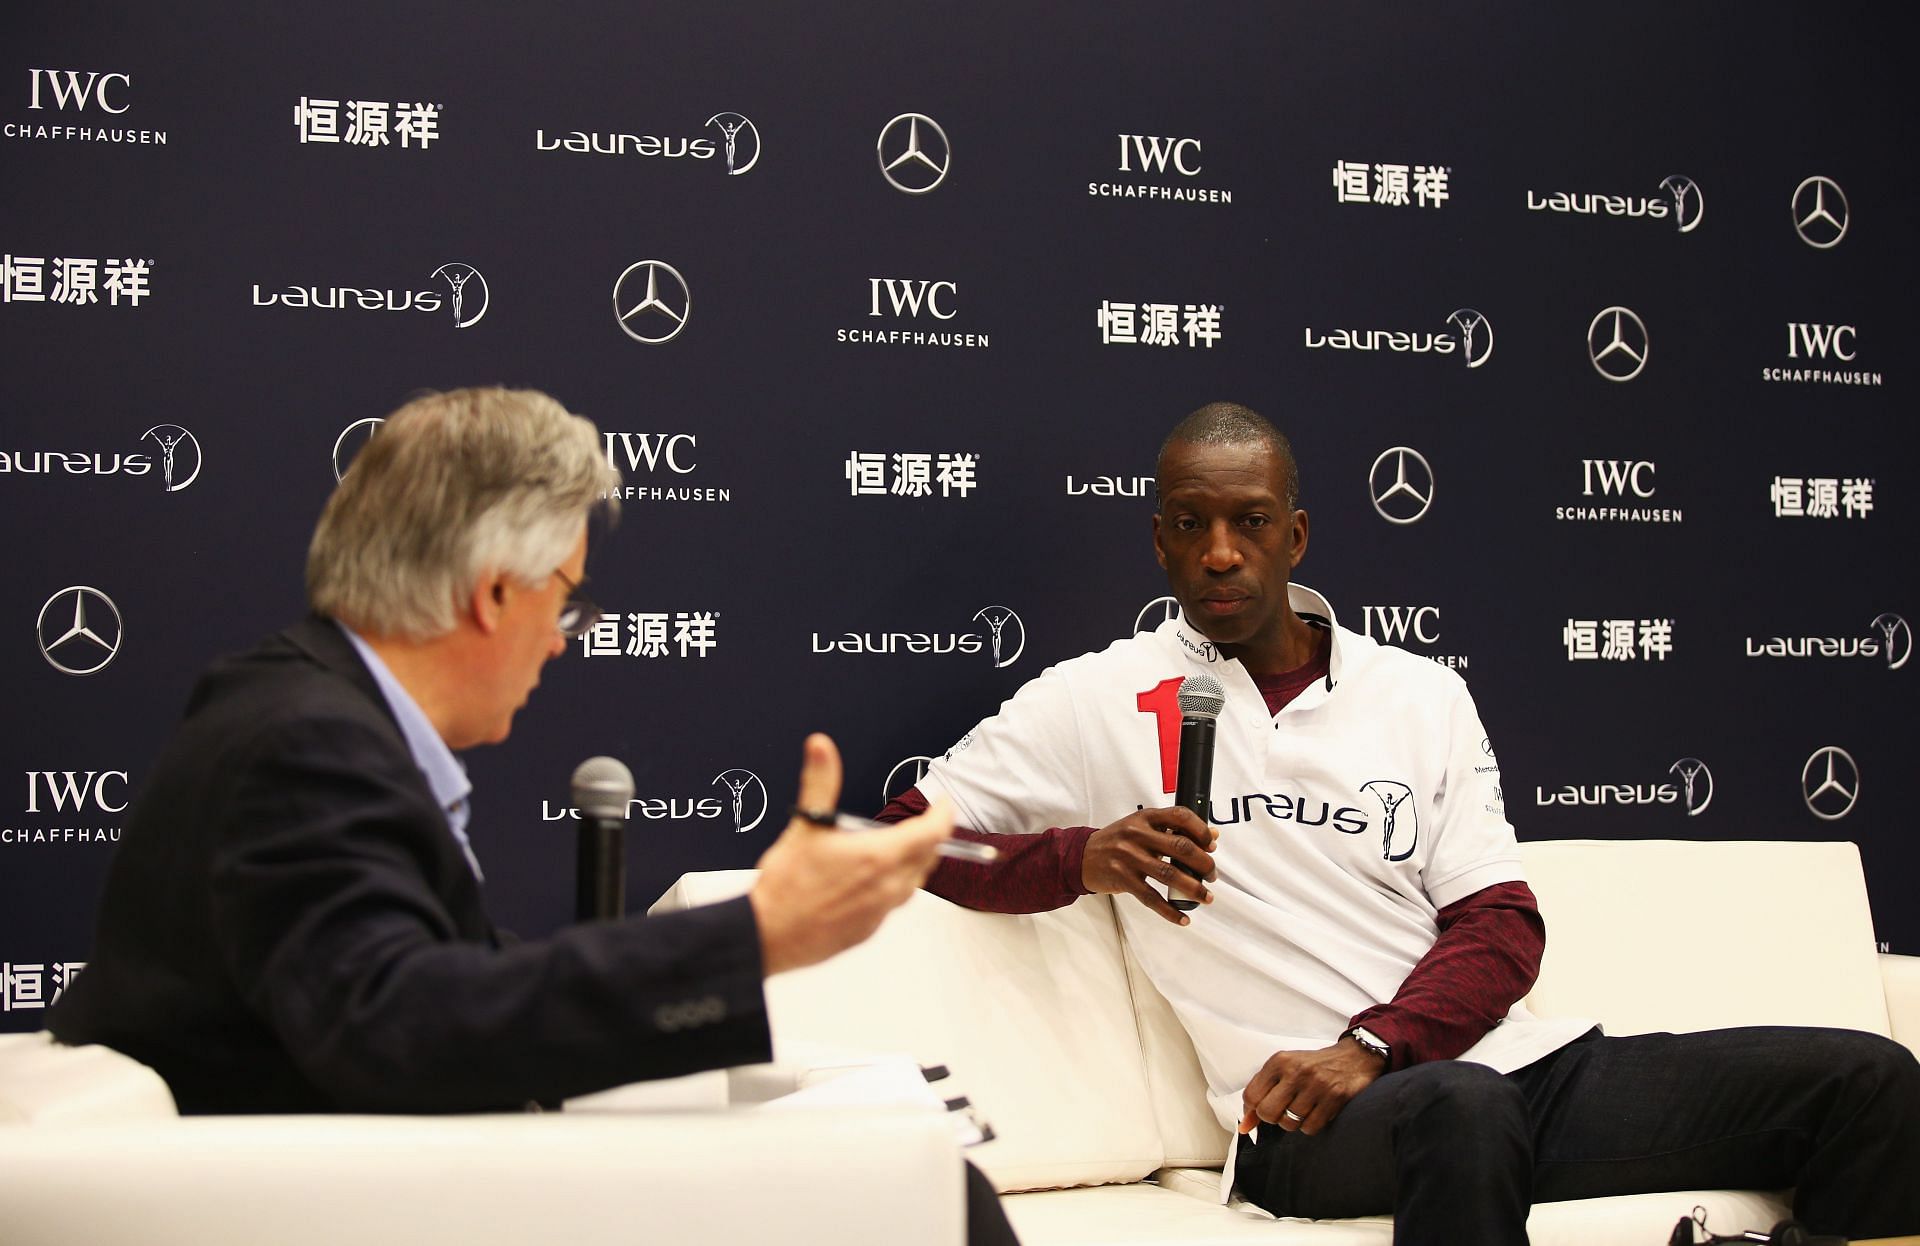 Laureus World Sports Academy member Michael Johnson speaks during a media interview at the Shanghai Grand Theatre prior to the Laureus World Sports Awards on April 14, 2015 in Shanghai, China. (Photo by Ian Walton/Getty Images for Laureus)